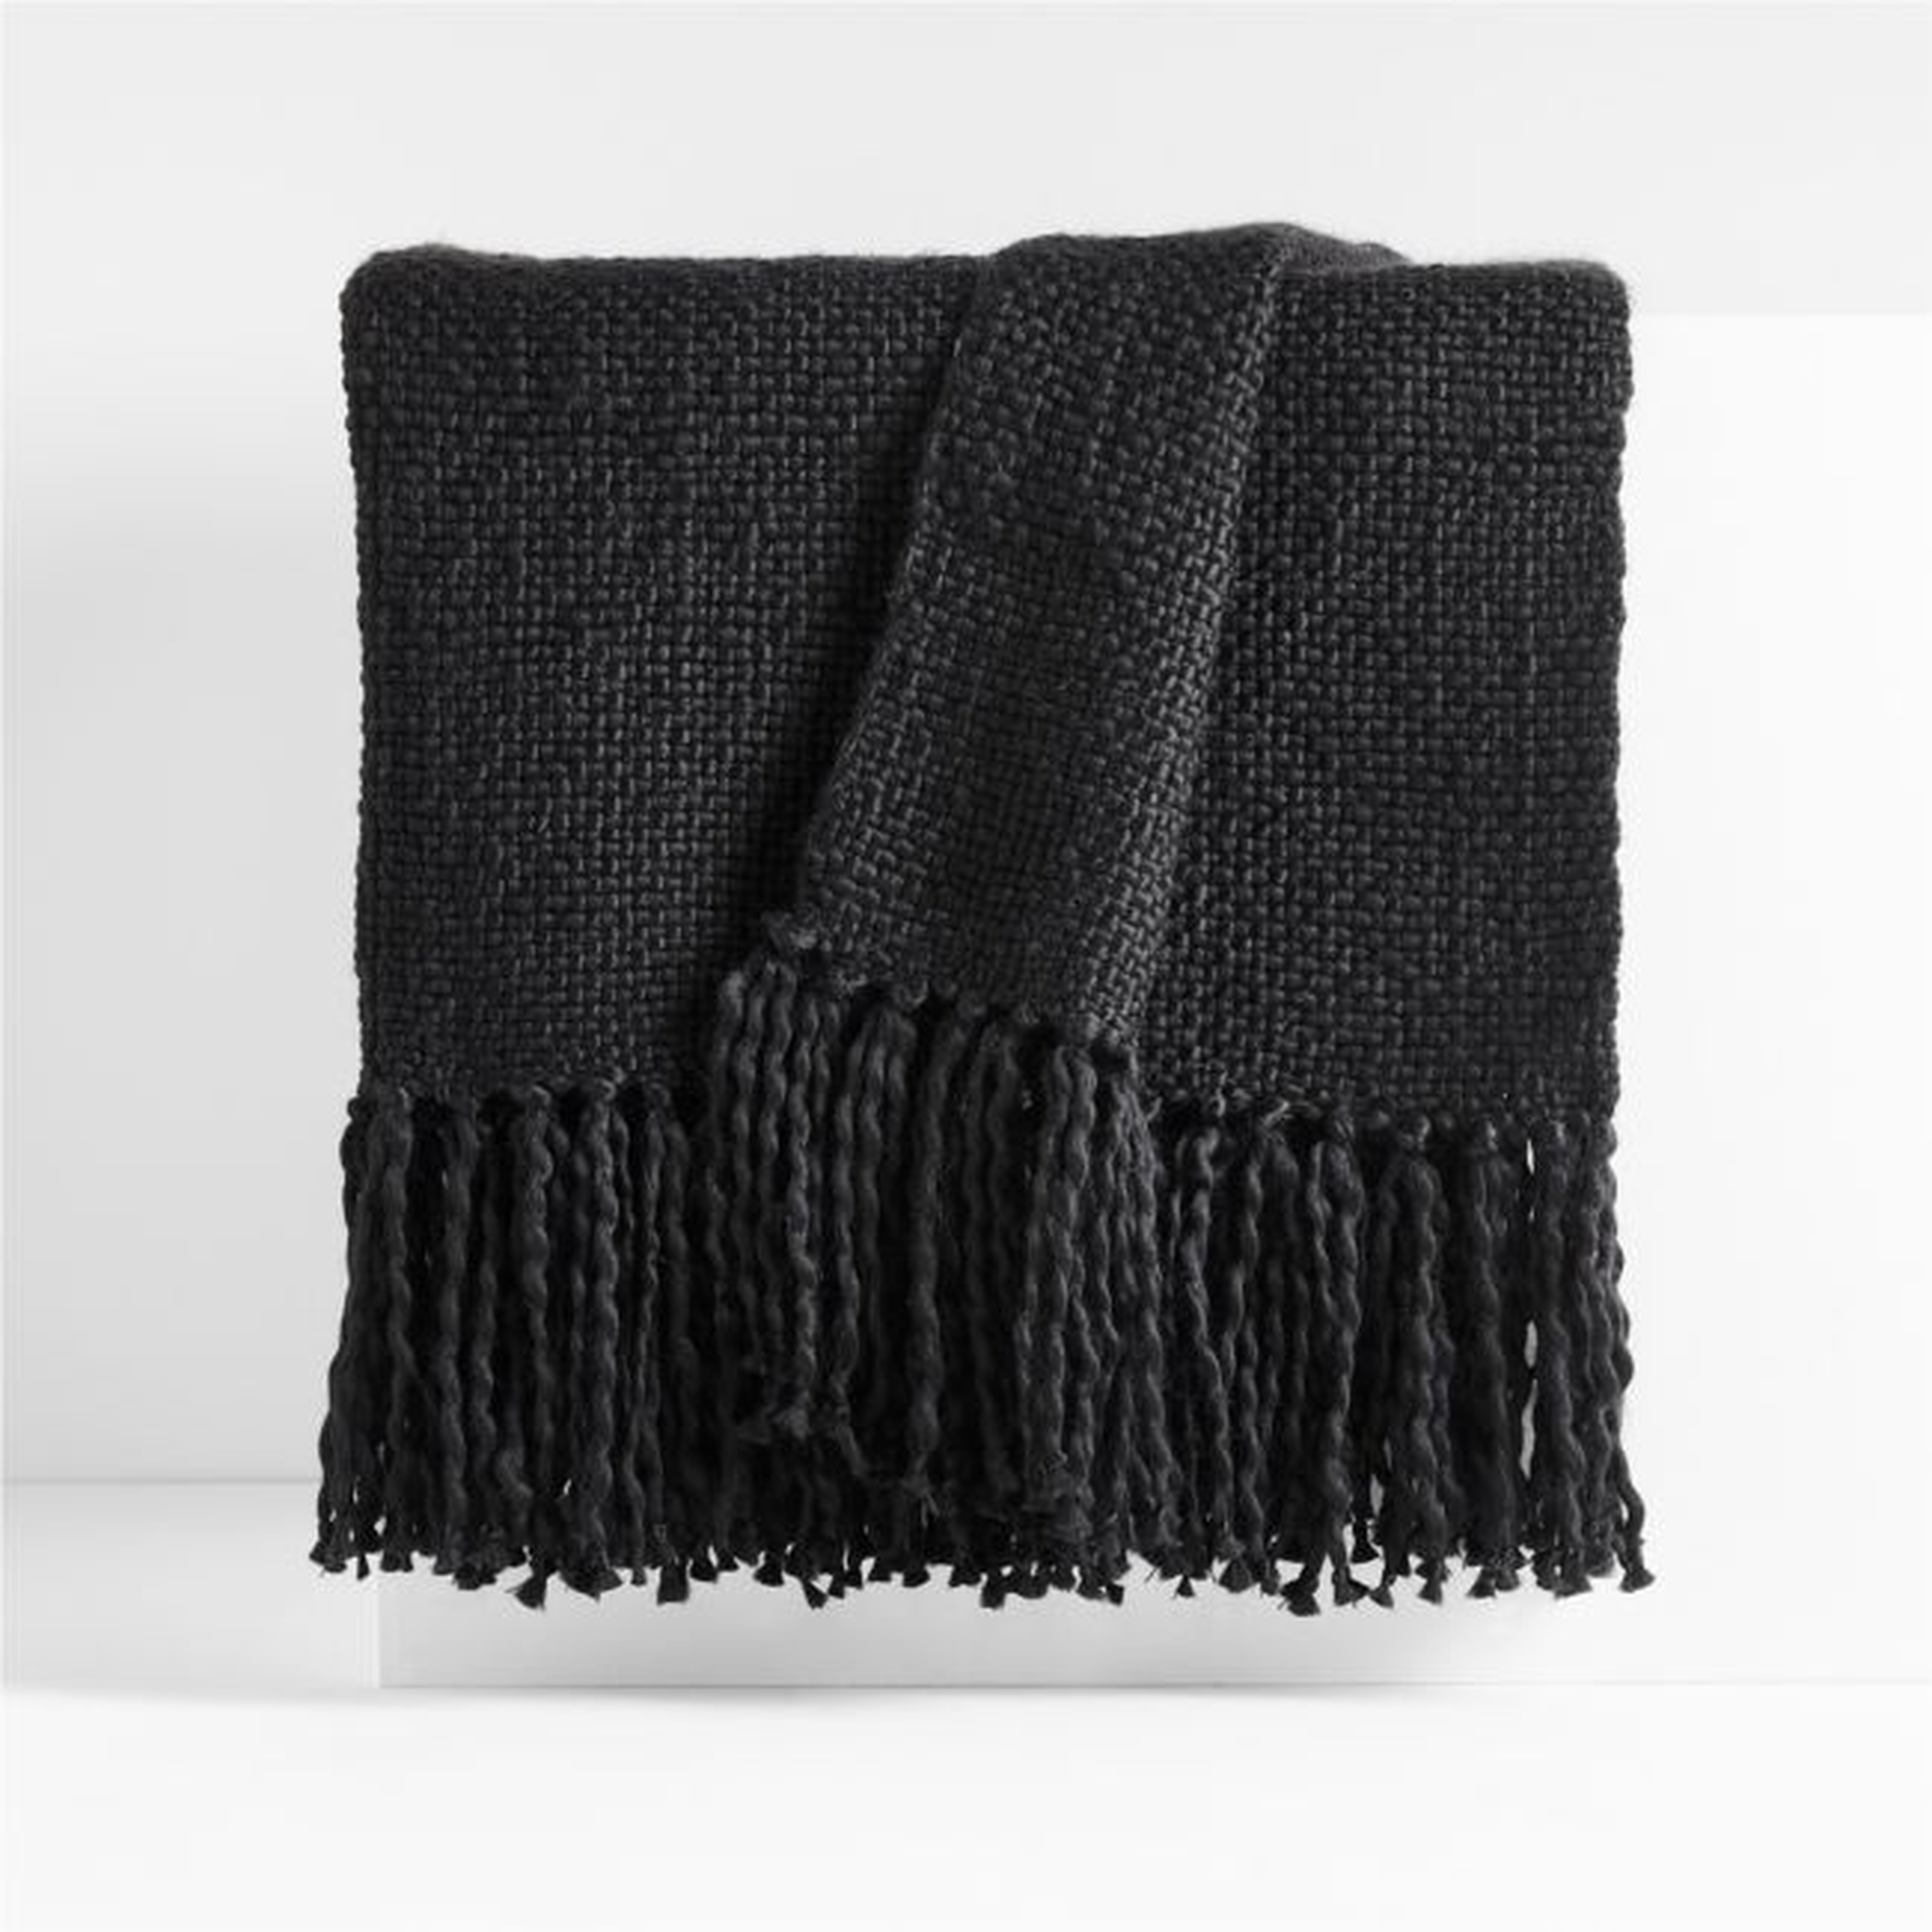 Styles 70"x55" Black Throw Blanket - Crate and Barrel